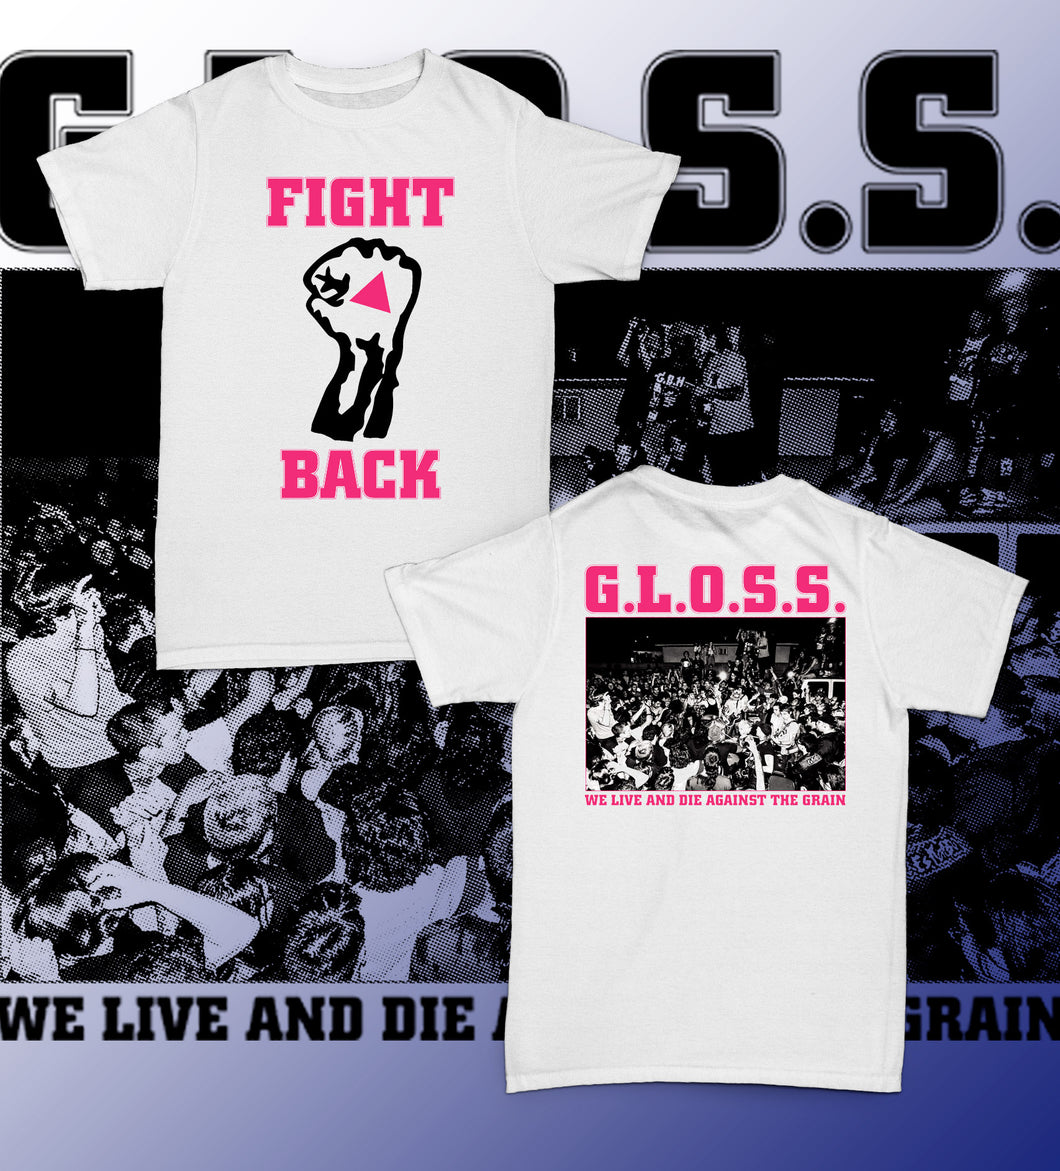 G.L.O.S.S - FIGHT BACK Tee